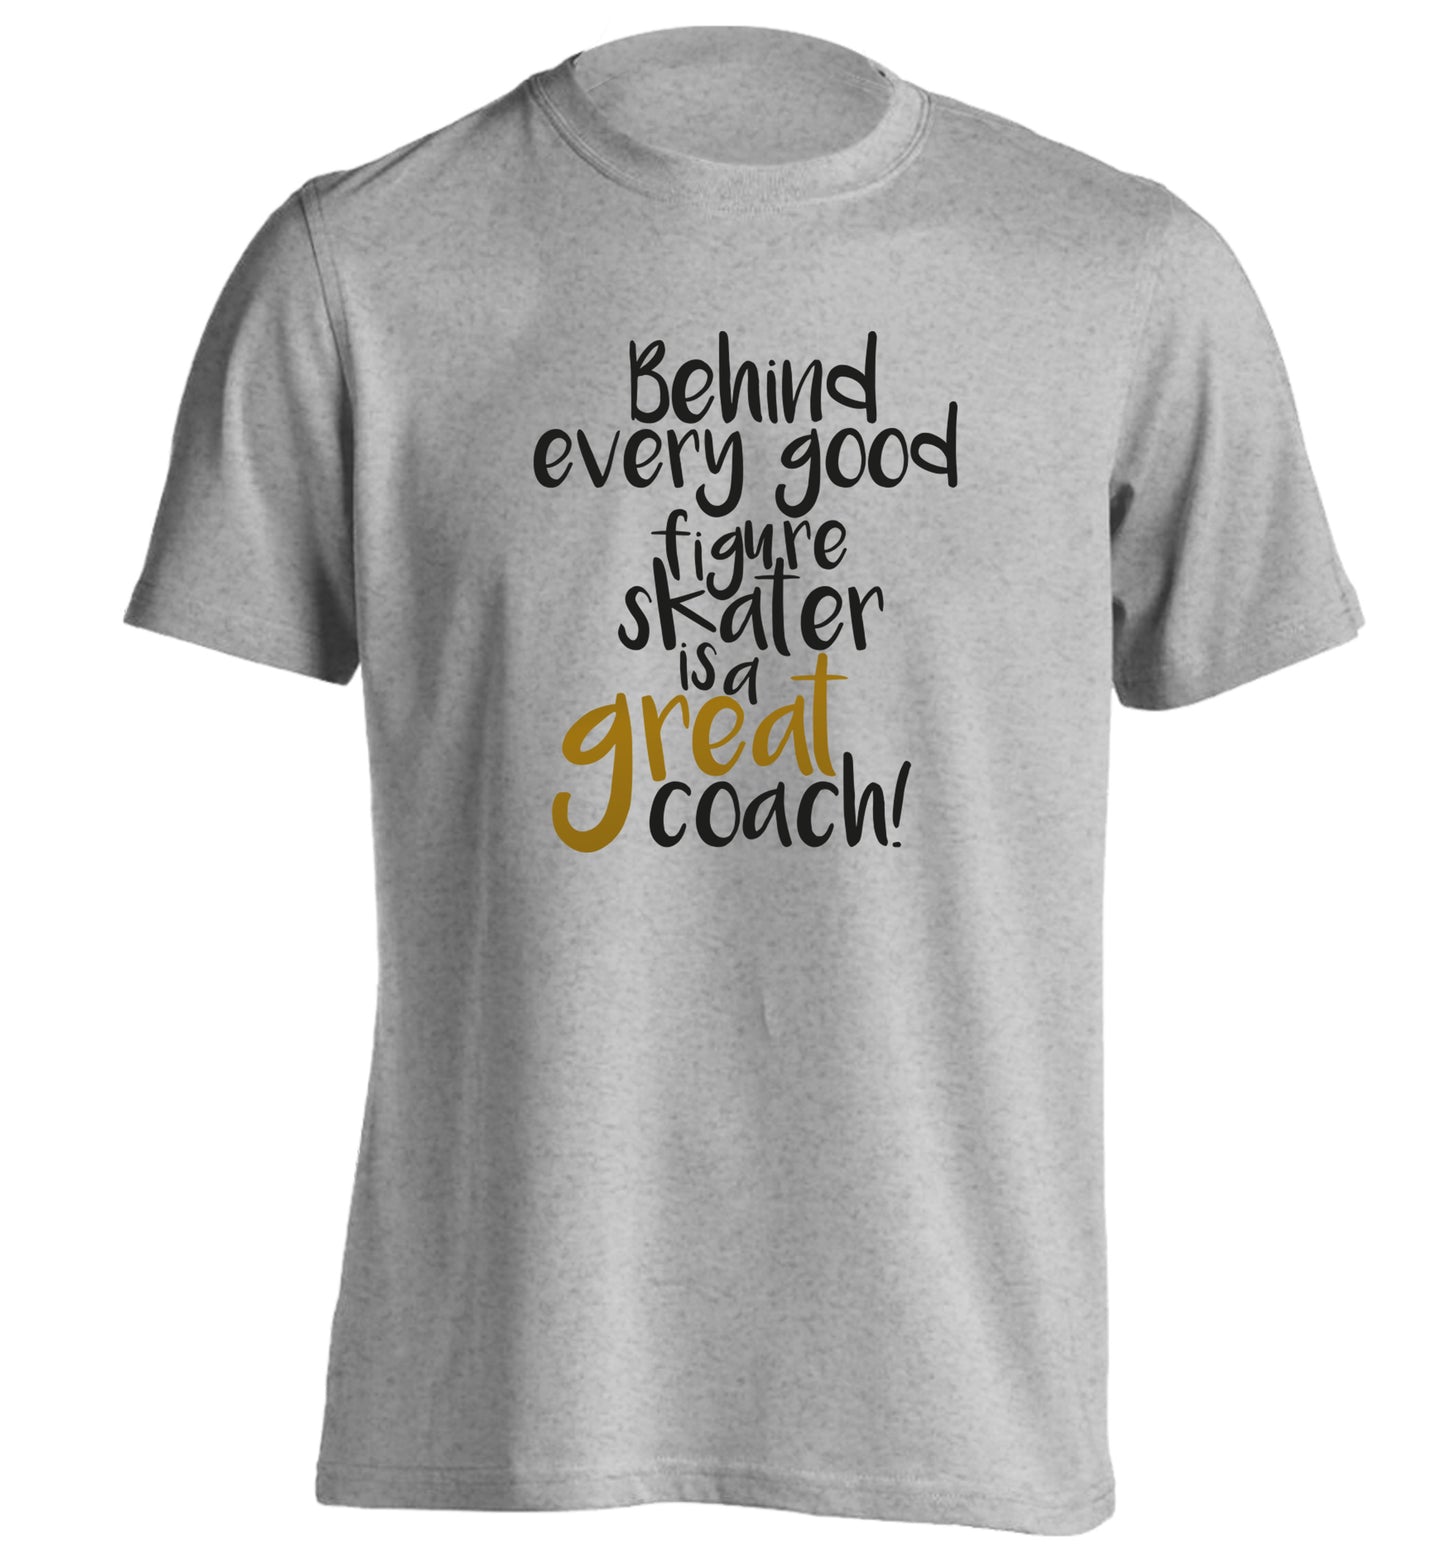 Behind every good figure skater is a great coach adults unisexgrey Tshirt 2XL